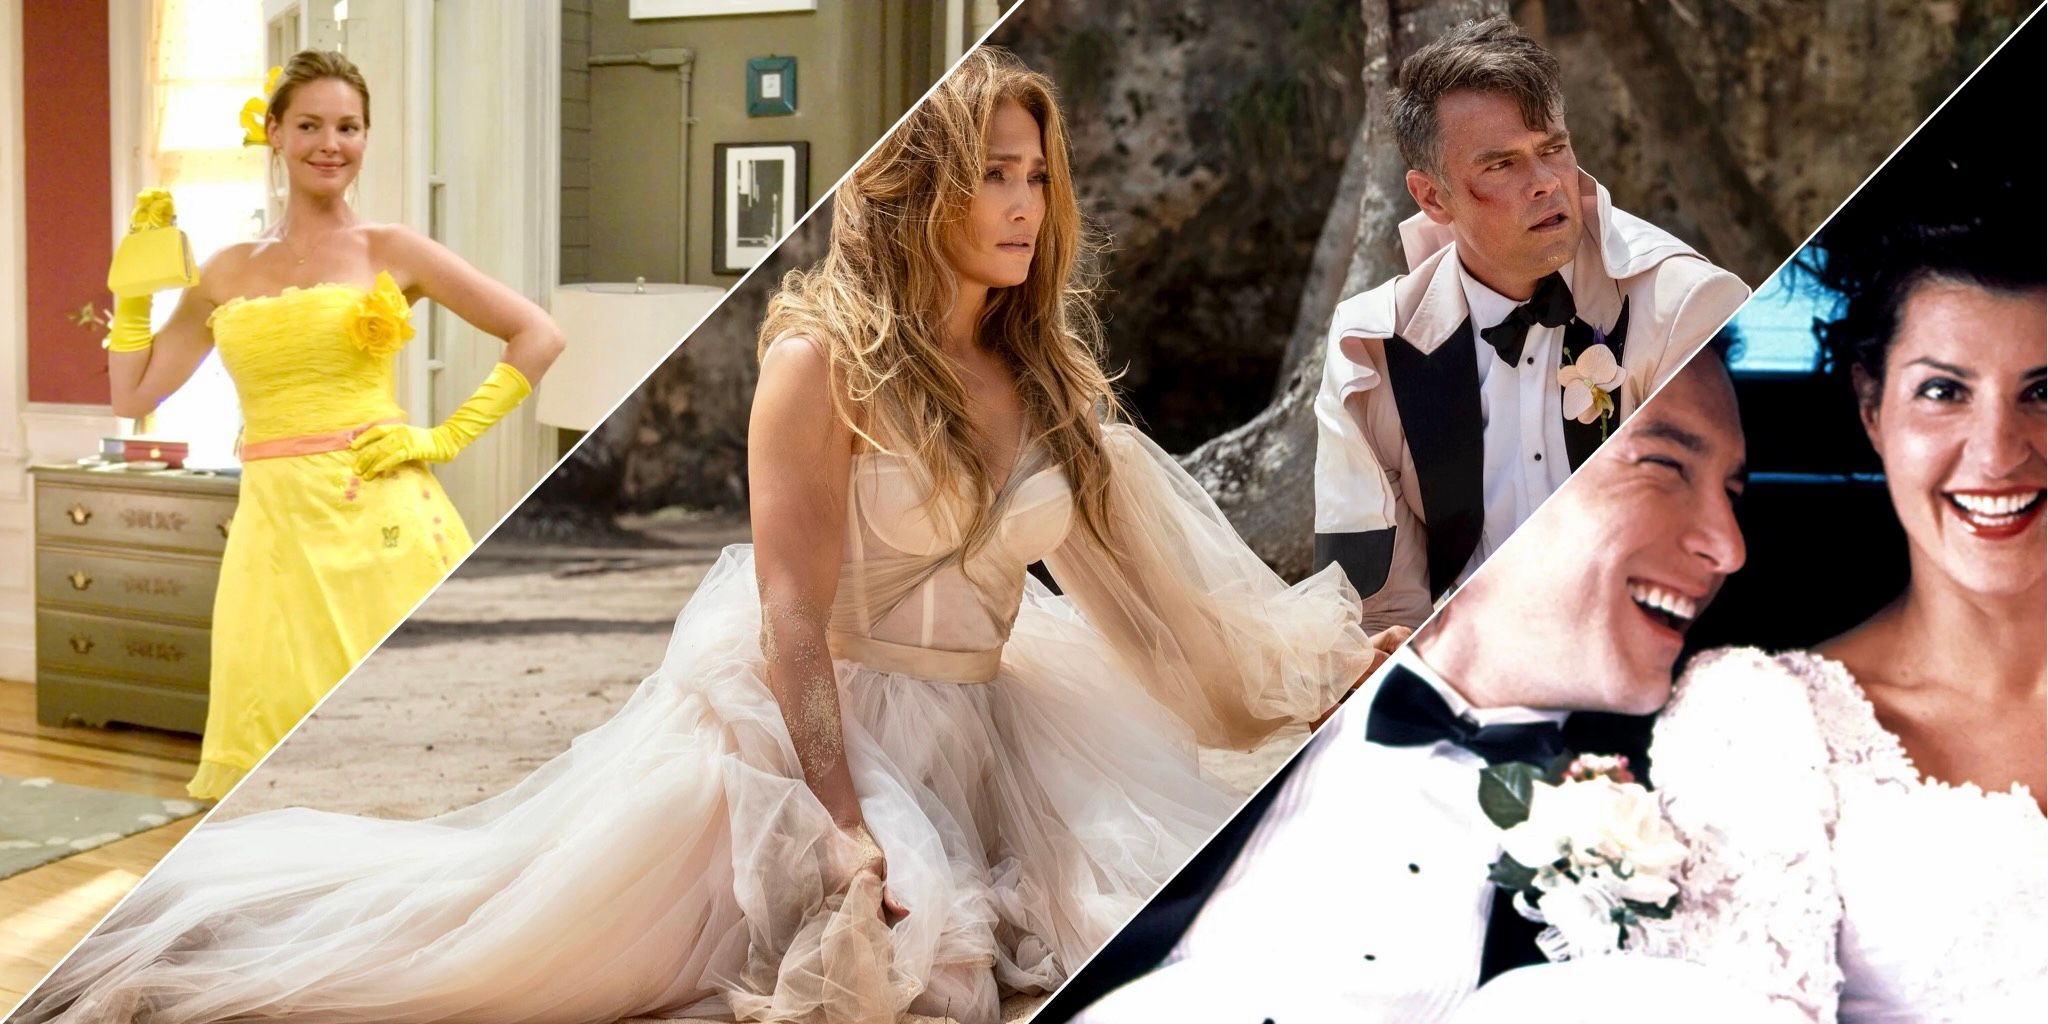 A collage of photos from wedding-themed movies including My Big Fat Greek Wedding, 27 Dresses, and Shotgun Wedding